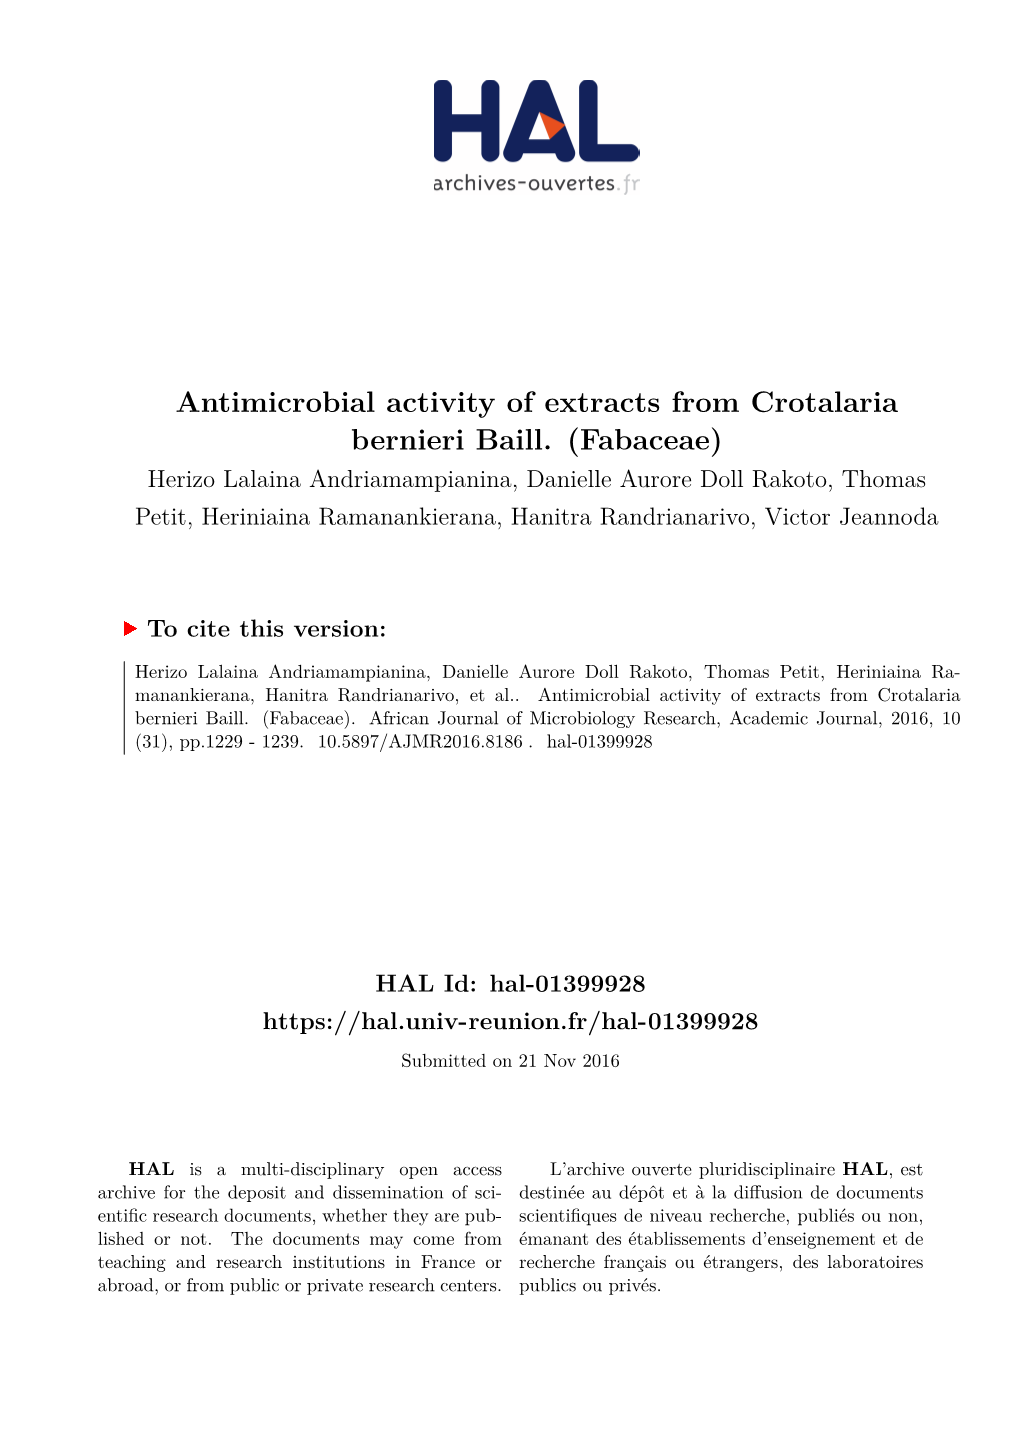 Antimicrobial Activity of Extracts from Crotalaria Bernieri Baill. (Fabaceae)